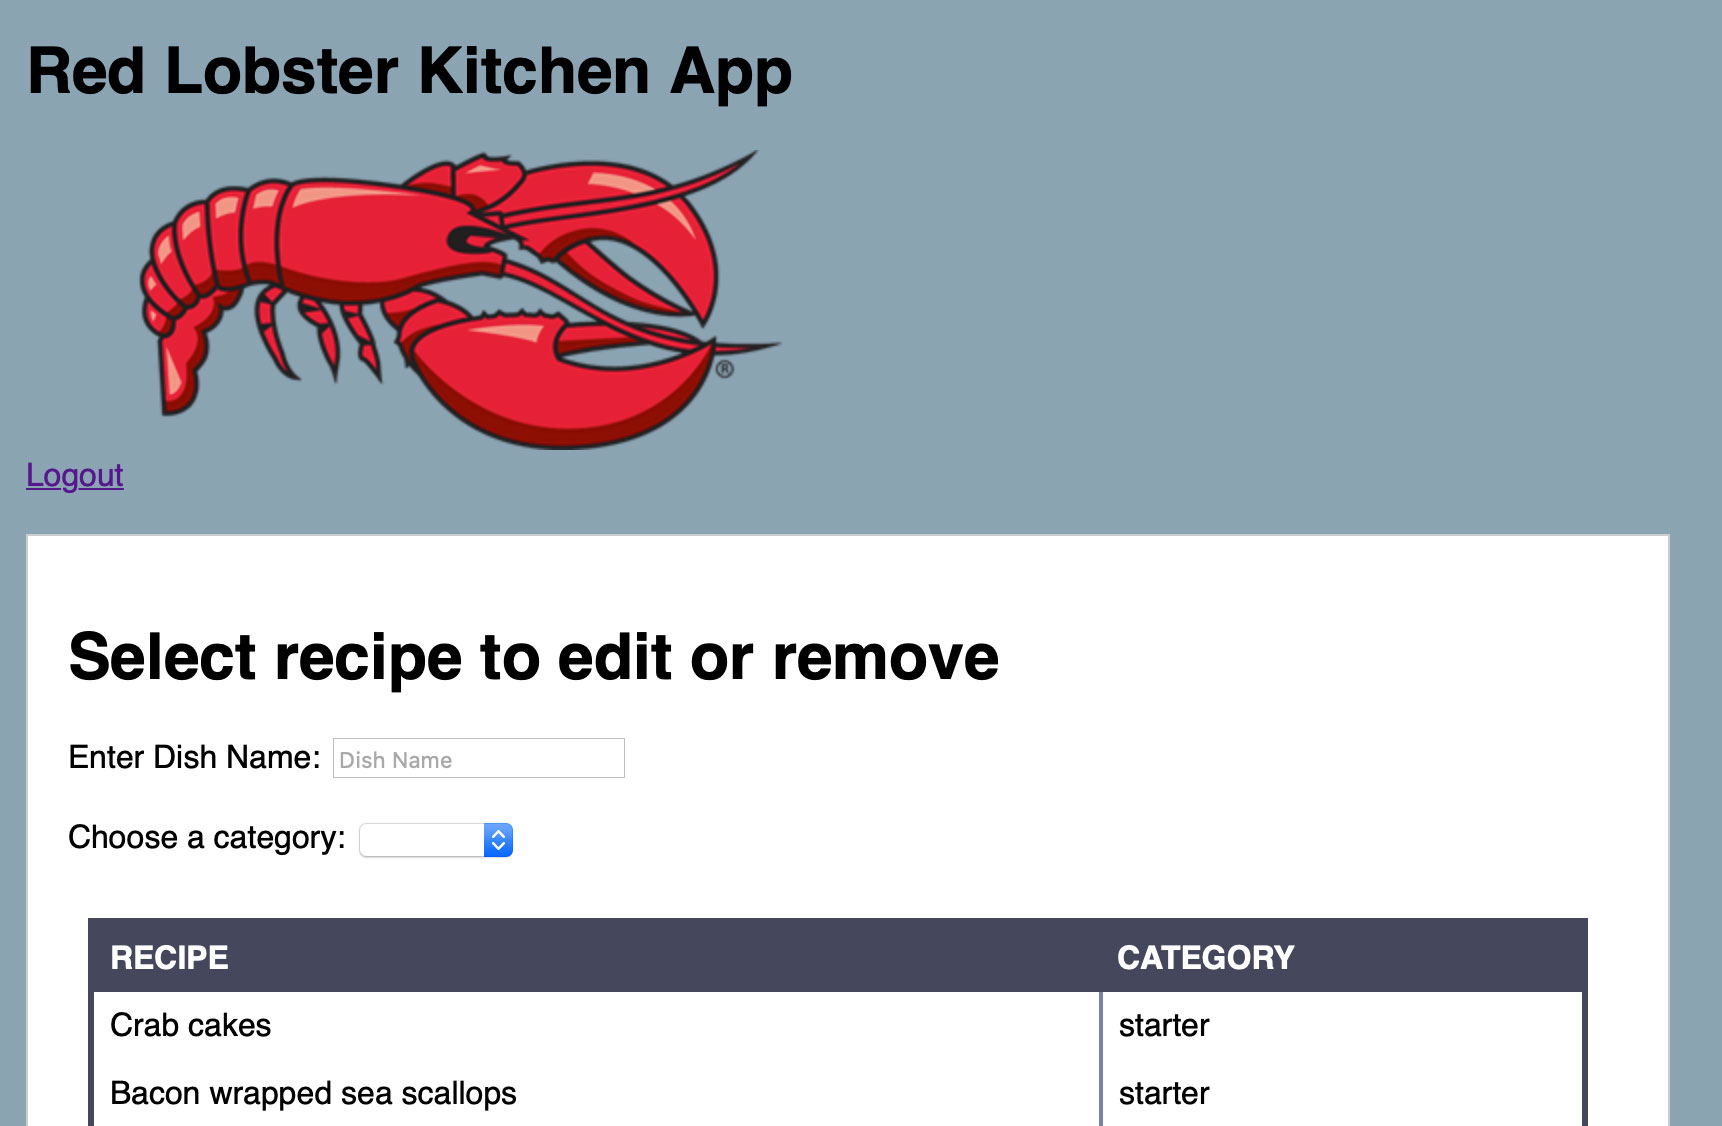 Students cook up new way for Red Lobster to access recipes